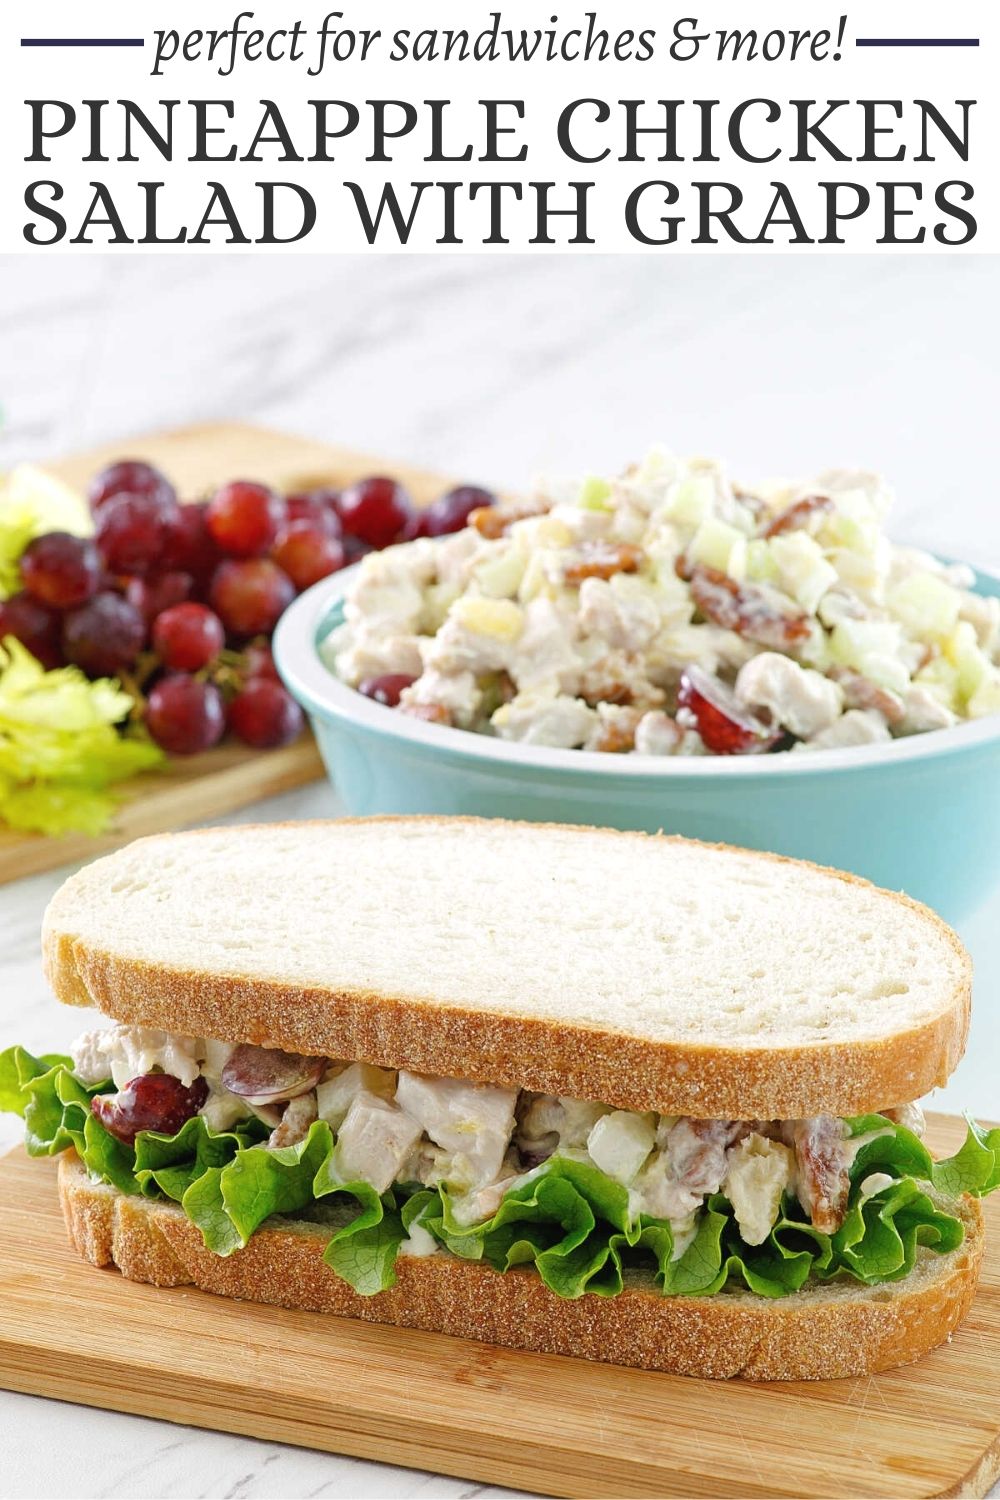 This chicken salad is the perfect mix of sweet and savory, creamy and crunchy. The addition of fruit and the simple dressing bring it all together to make a versatile and delicious sandwich filling, cracker topper and more.